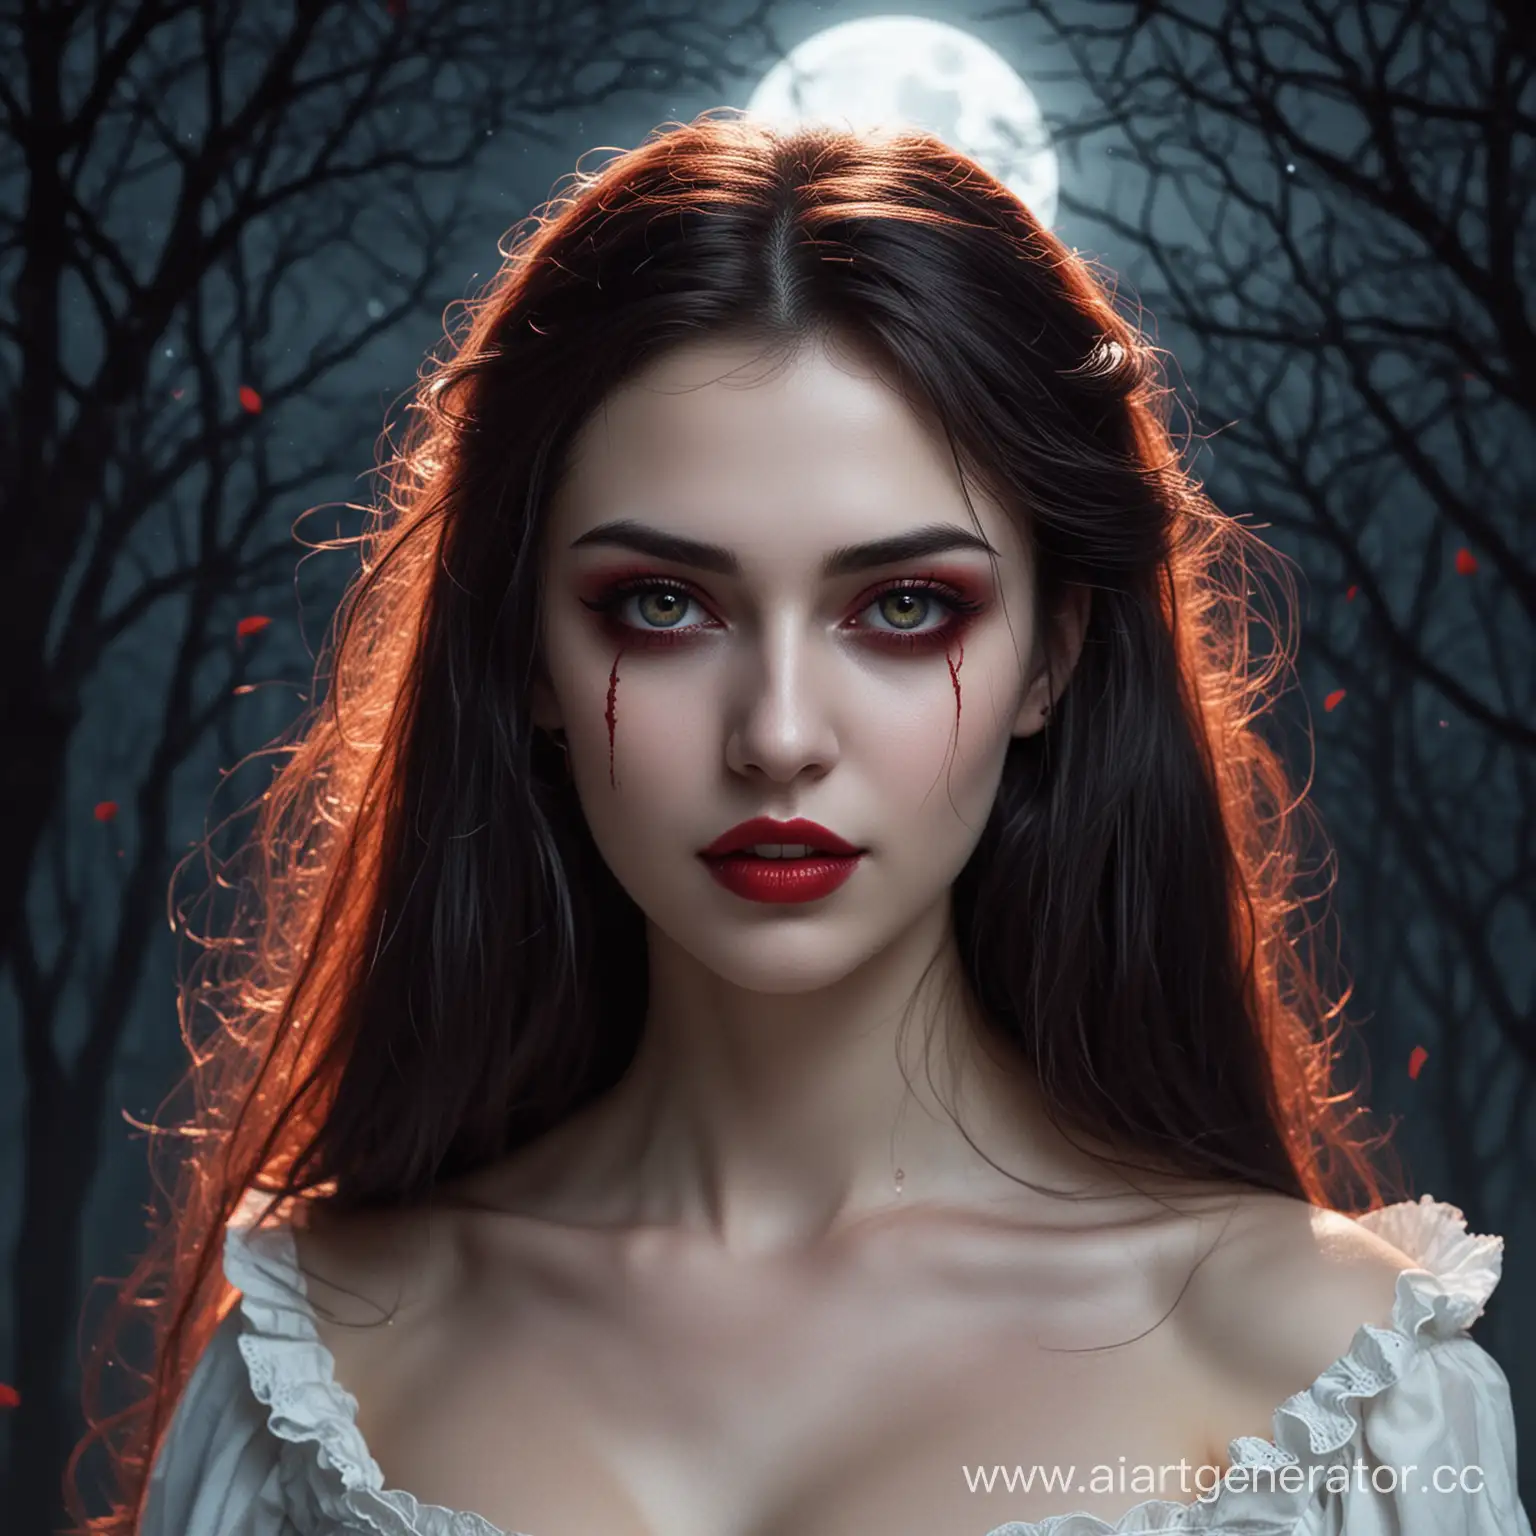 A bright moonlit night and a beautiful vampire in the blood